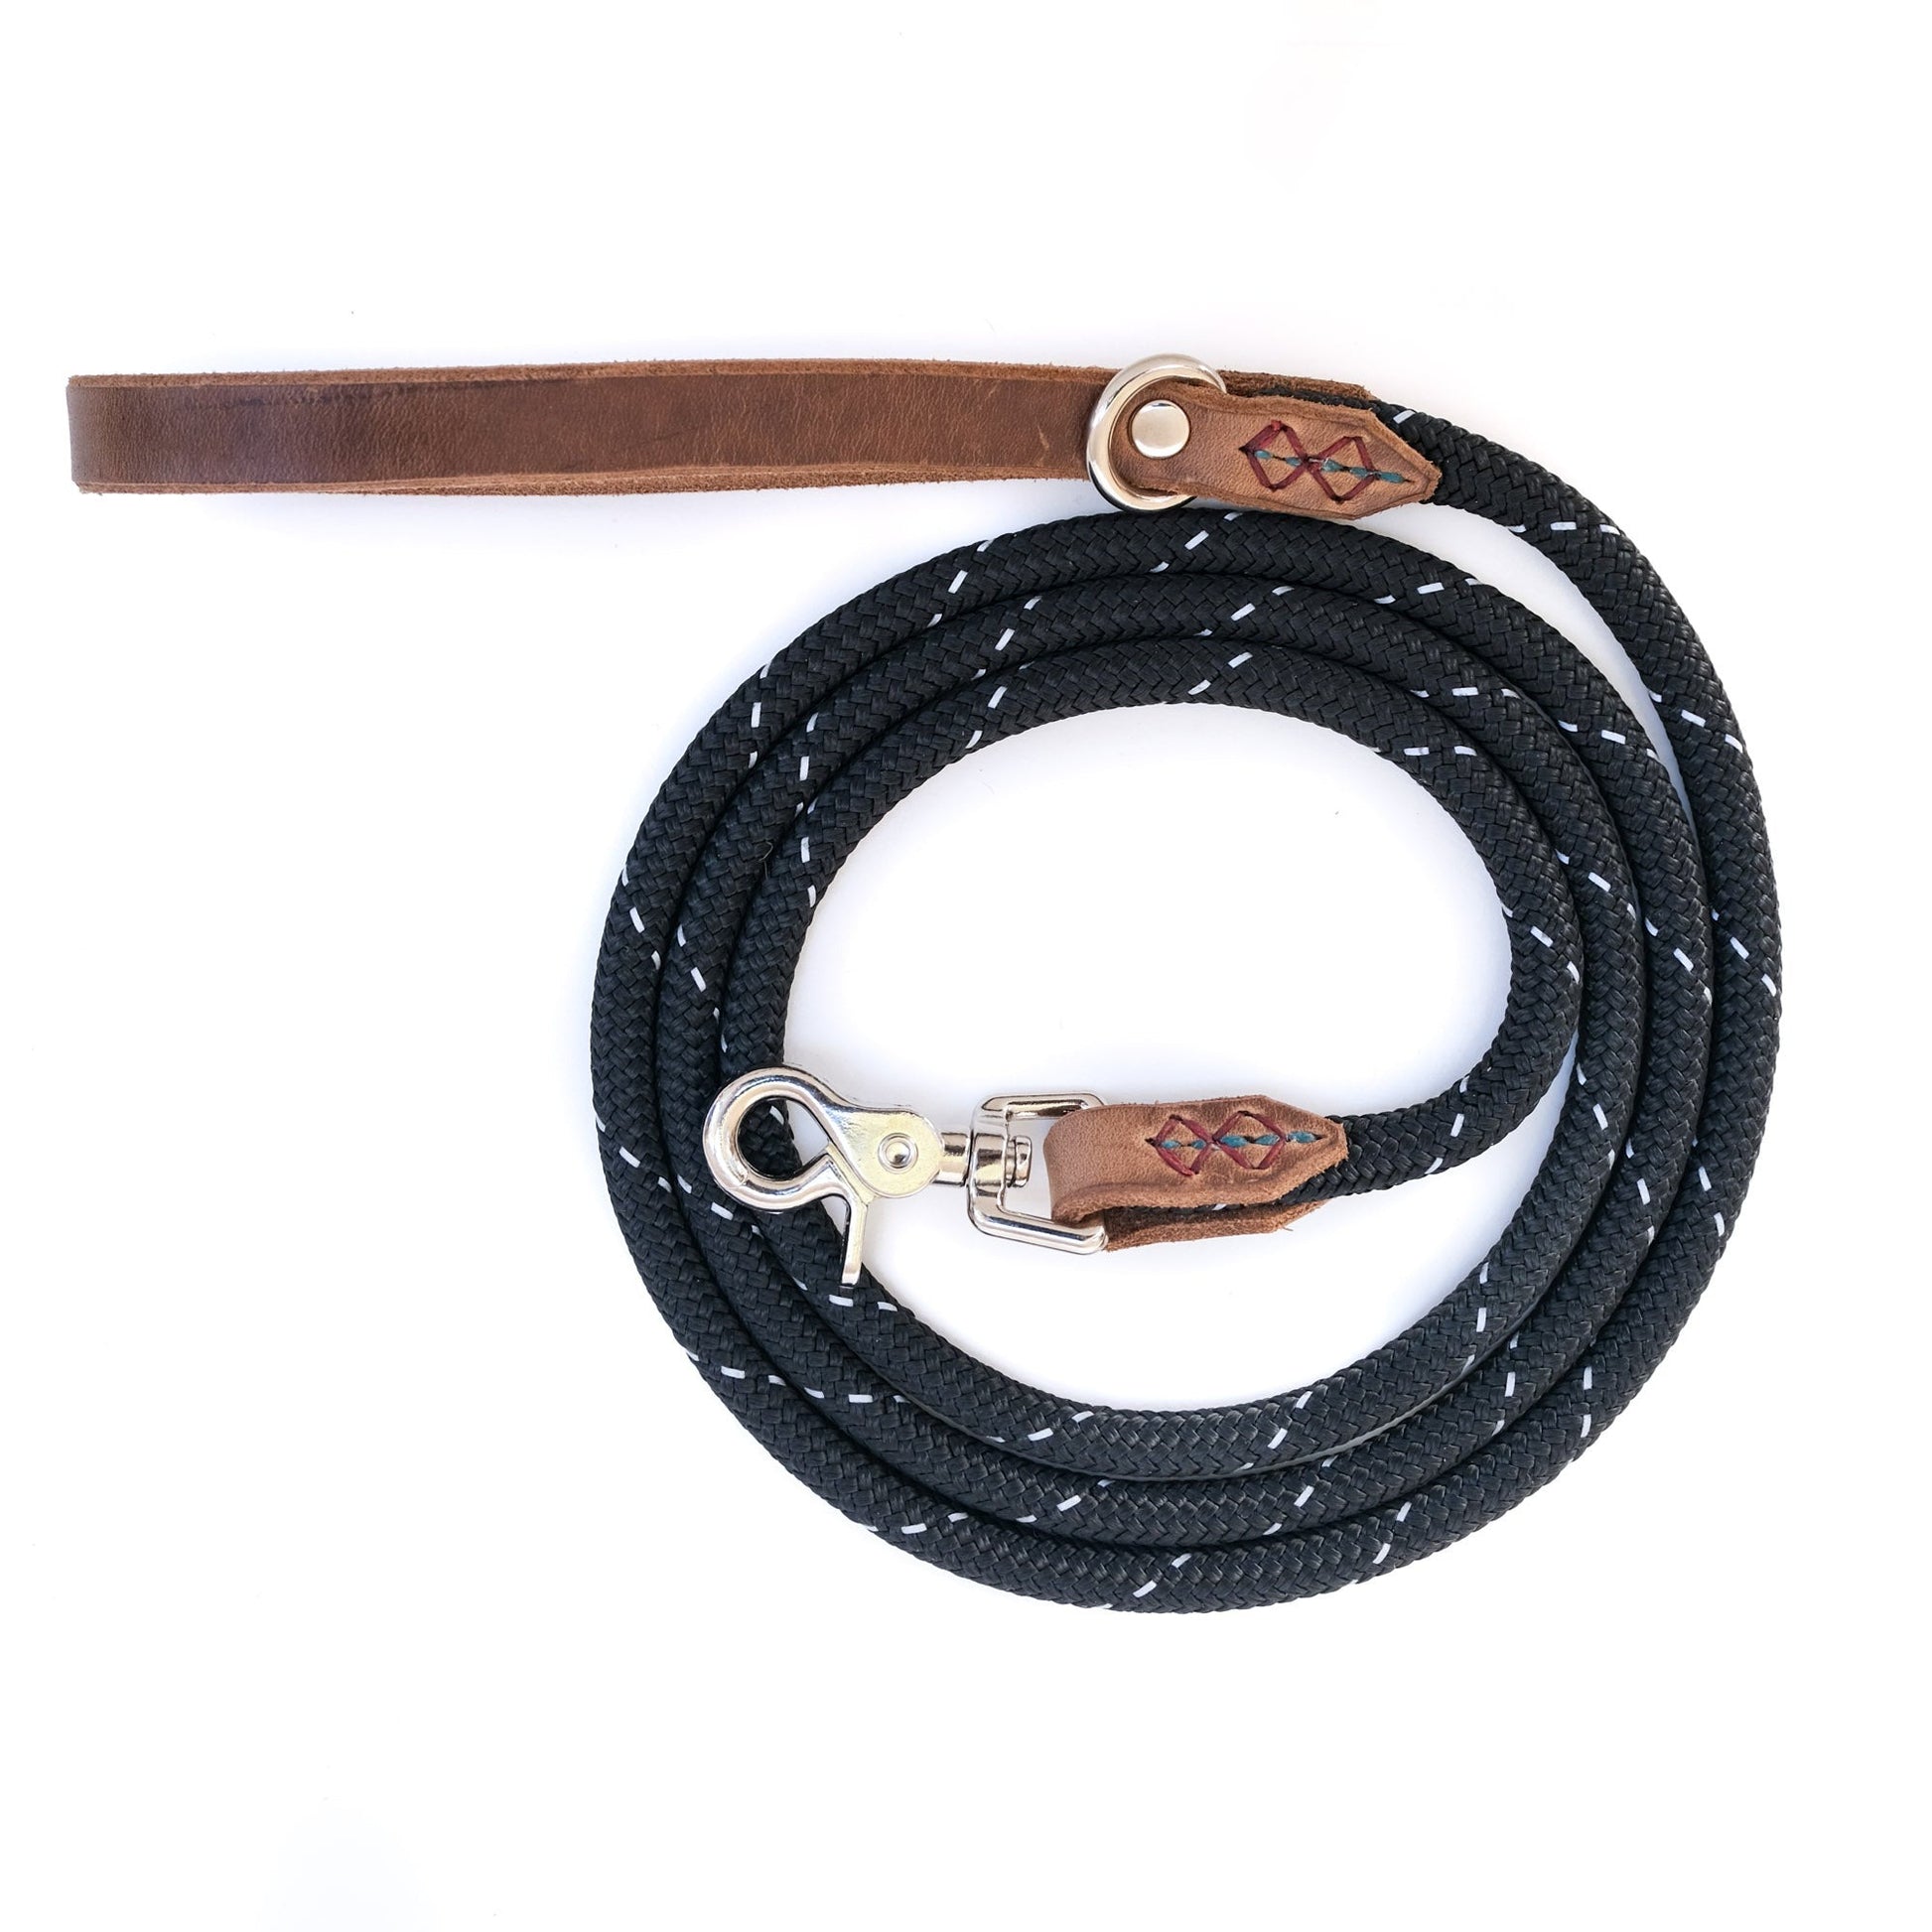 Dog Leash with Leather Handle Cotton Rope, Best Dog Leashes